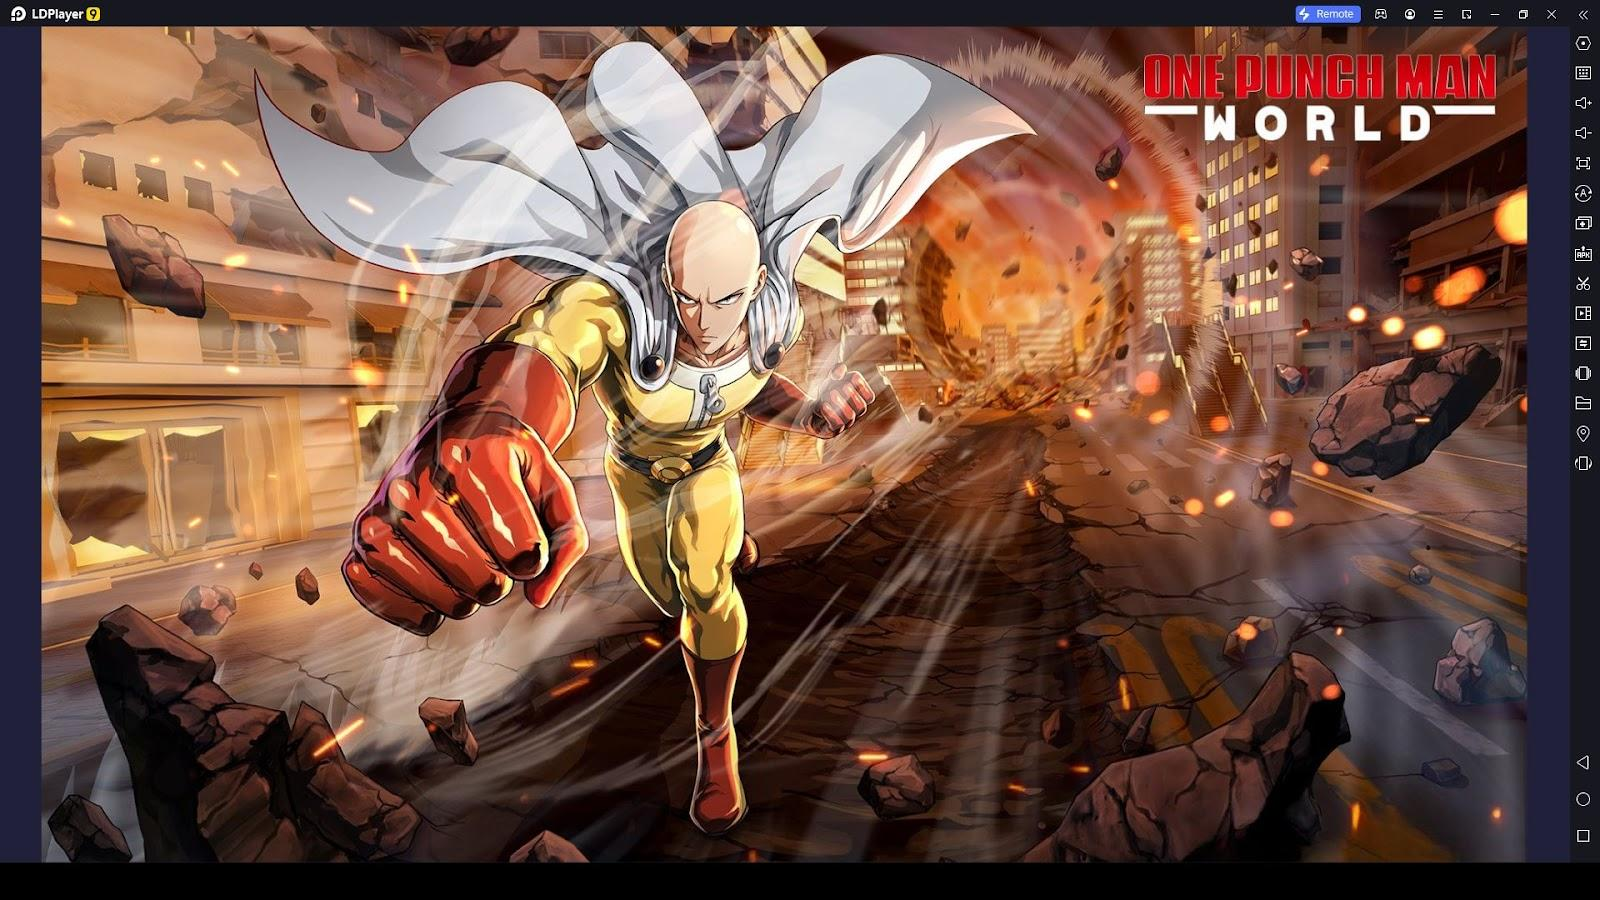 One Punch Man: World Tier List Guide